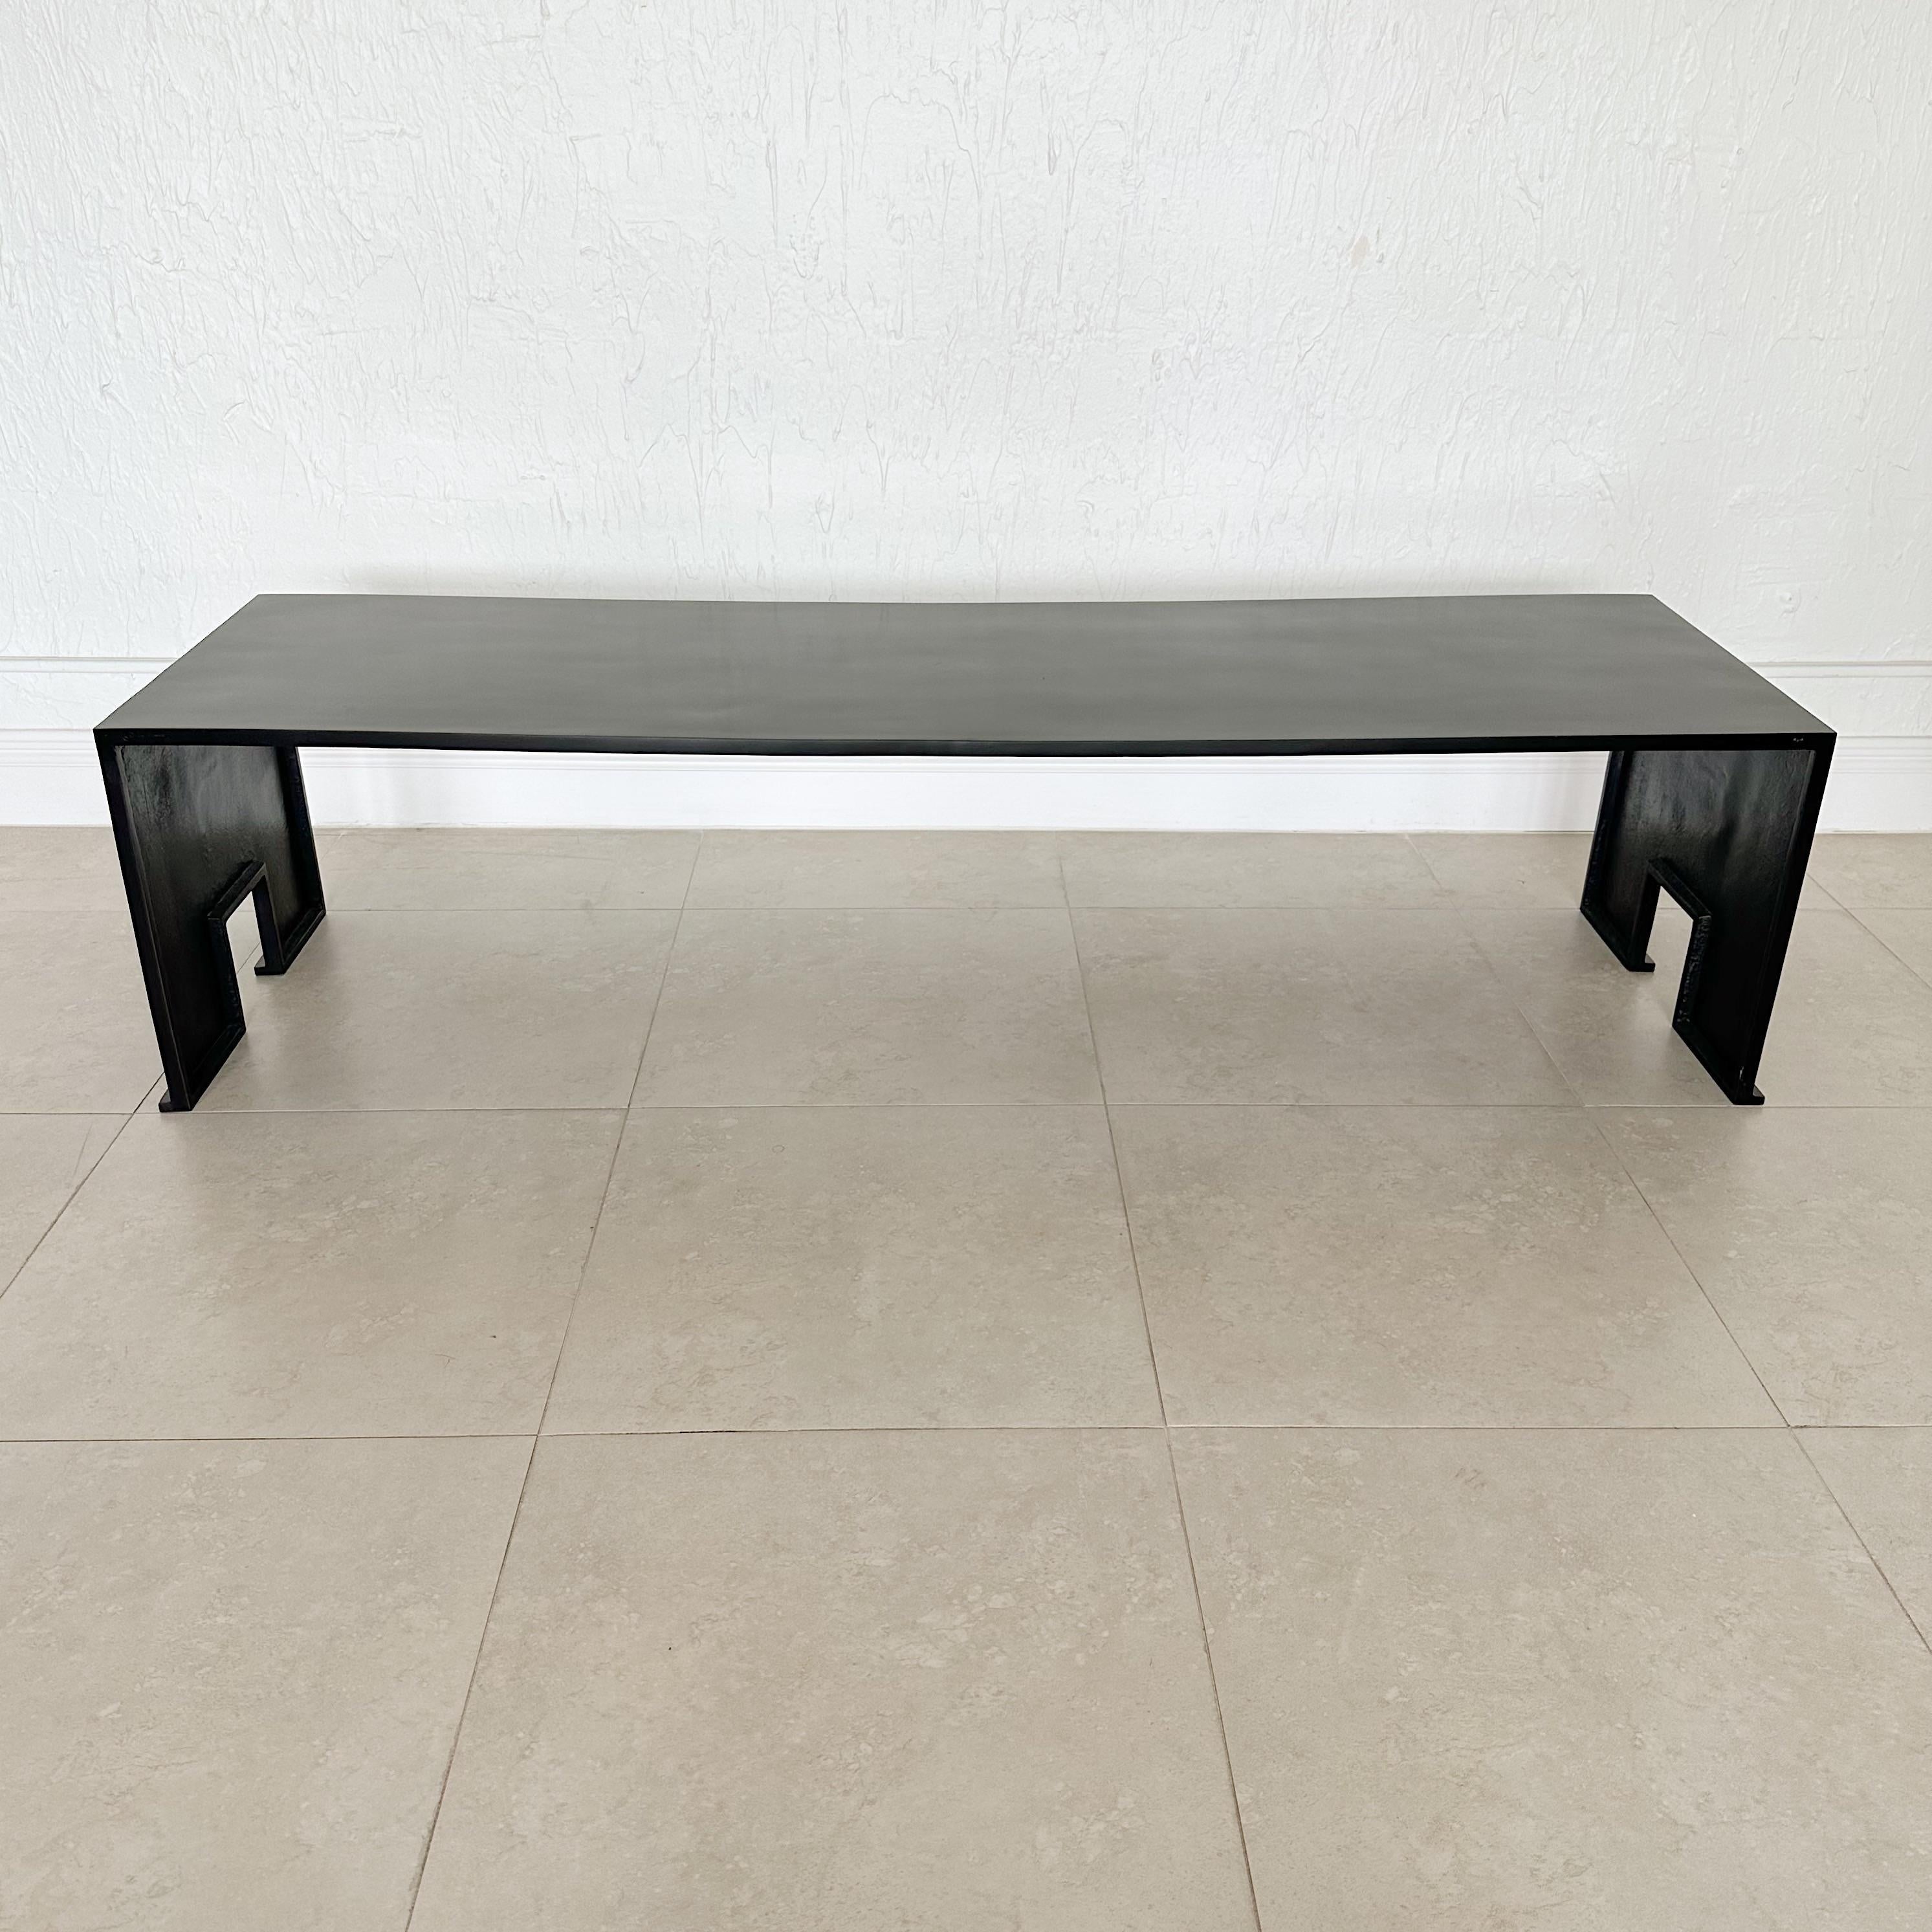 Solid bronze coffee table with a waxed black patina finish. Designed by Eric Schmitt for Christian Liaigre.
This table came in two finishes, smooth and hammered, this is the smooth version, and also the larger version. 
Circa 1998 Signed, Virgile ES